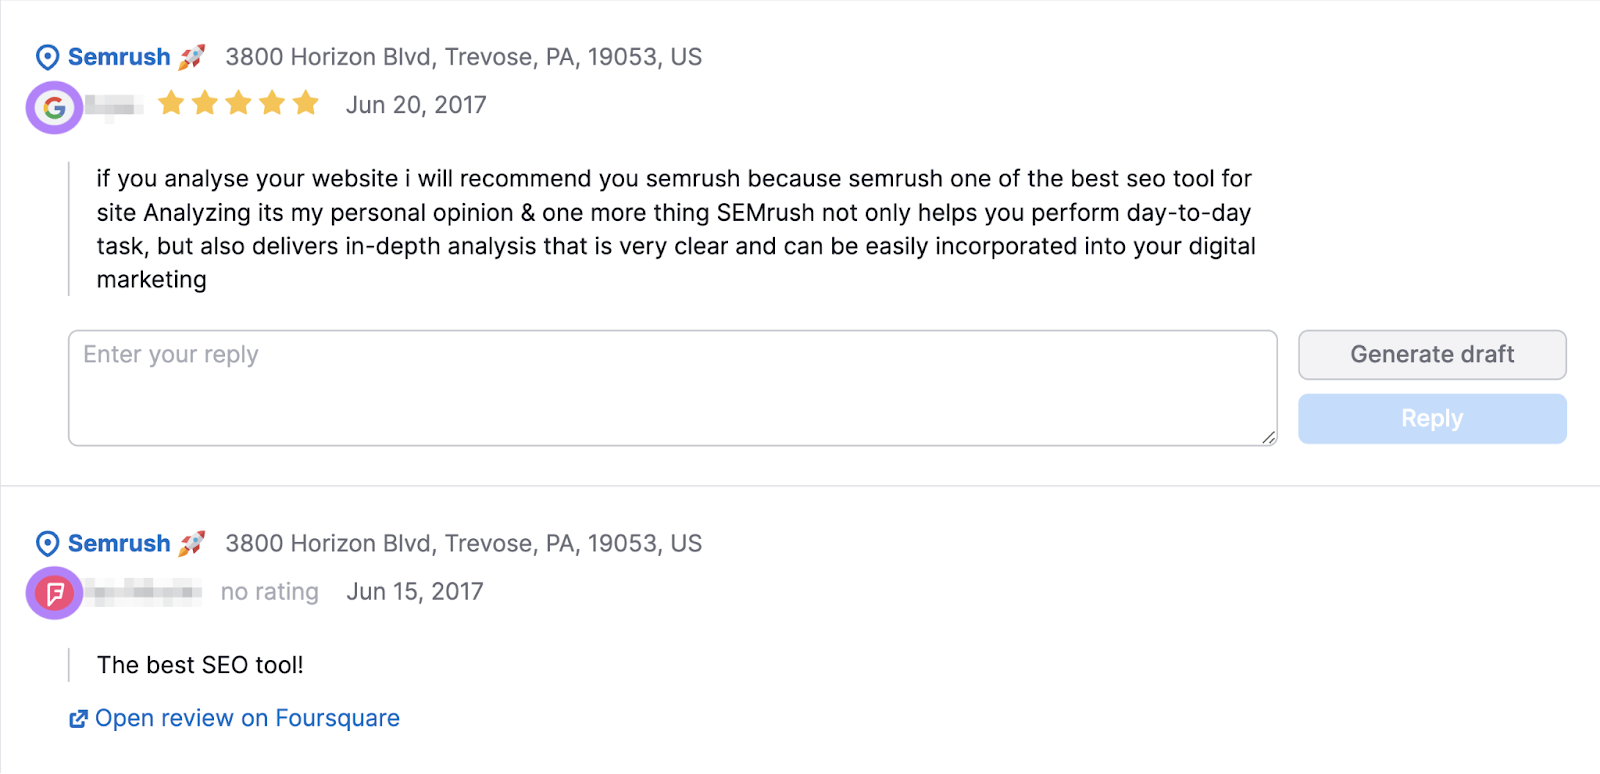 Reviews section in Review Management tool